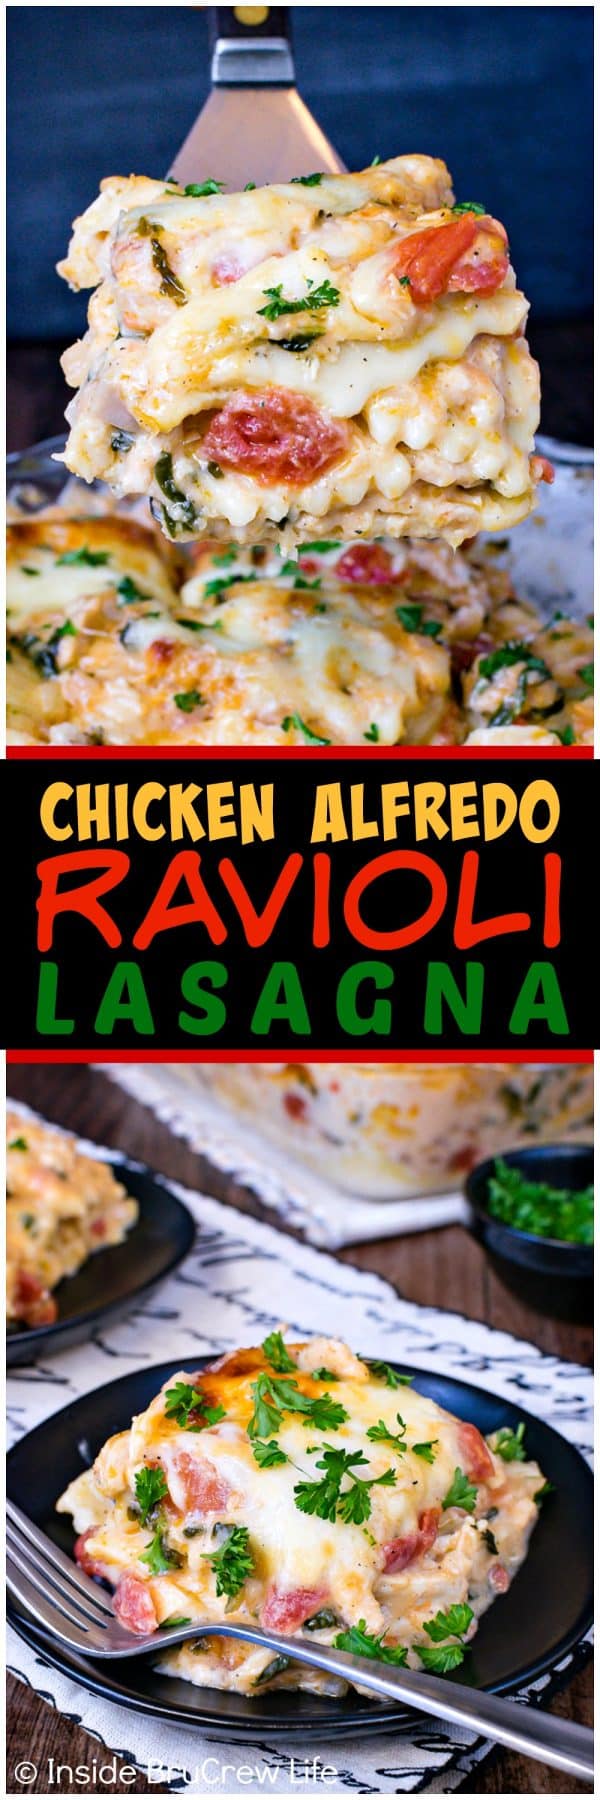 Chicken Alfredo Ravioli Lasagna - layers of cheesy pasta and loaded chicken Alfredo in one pan makes an incredible comfort food meal that the whole family will enjoy. Great recipe to make for busy nights. #dinner #pasta #comfortfood #ravioli #chickenalfredo #easymeals #recipes #lasagna 